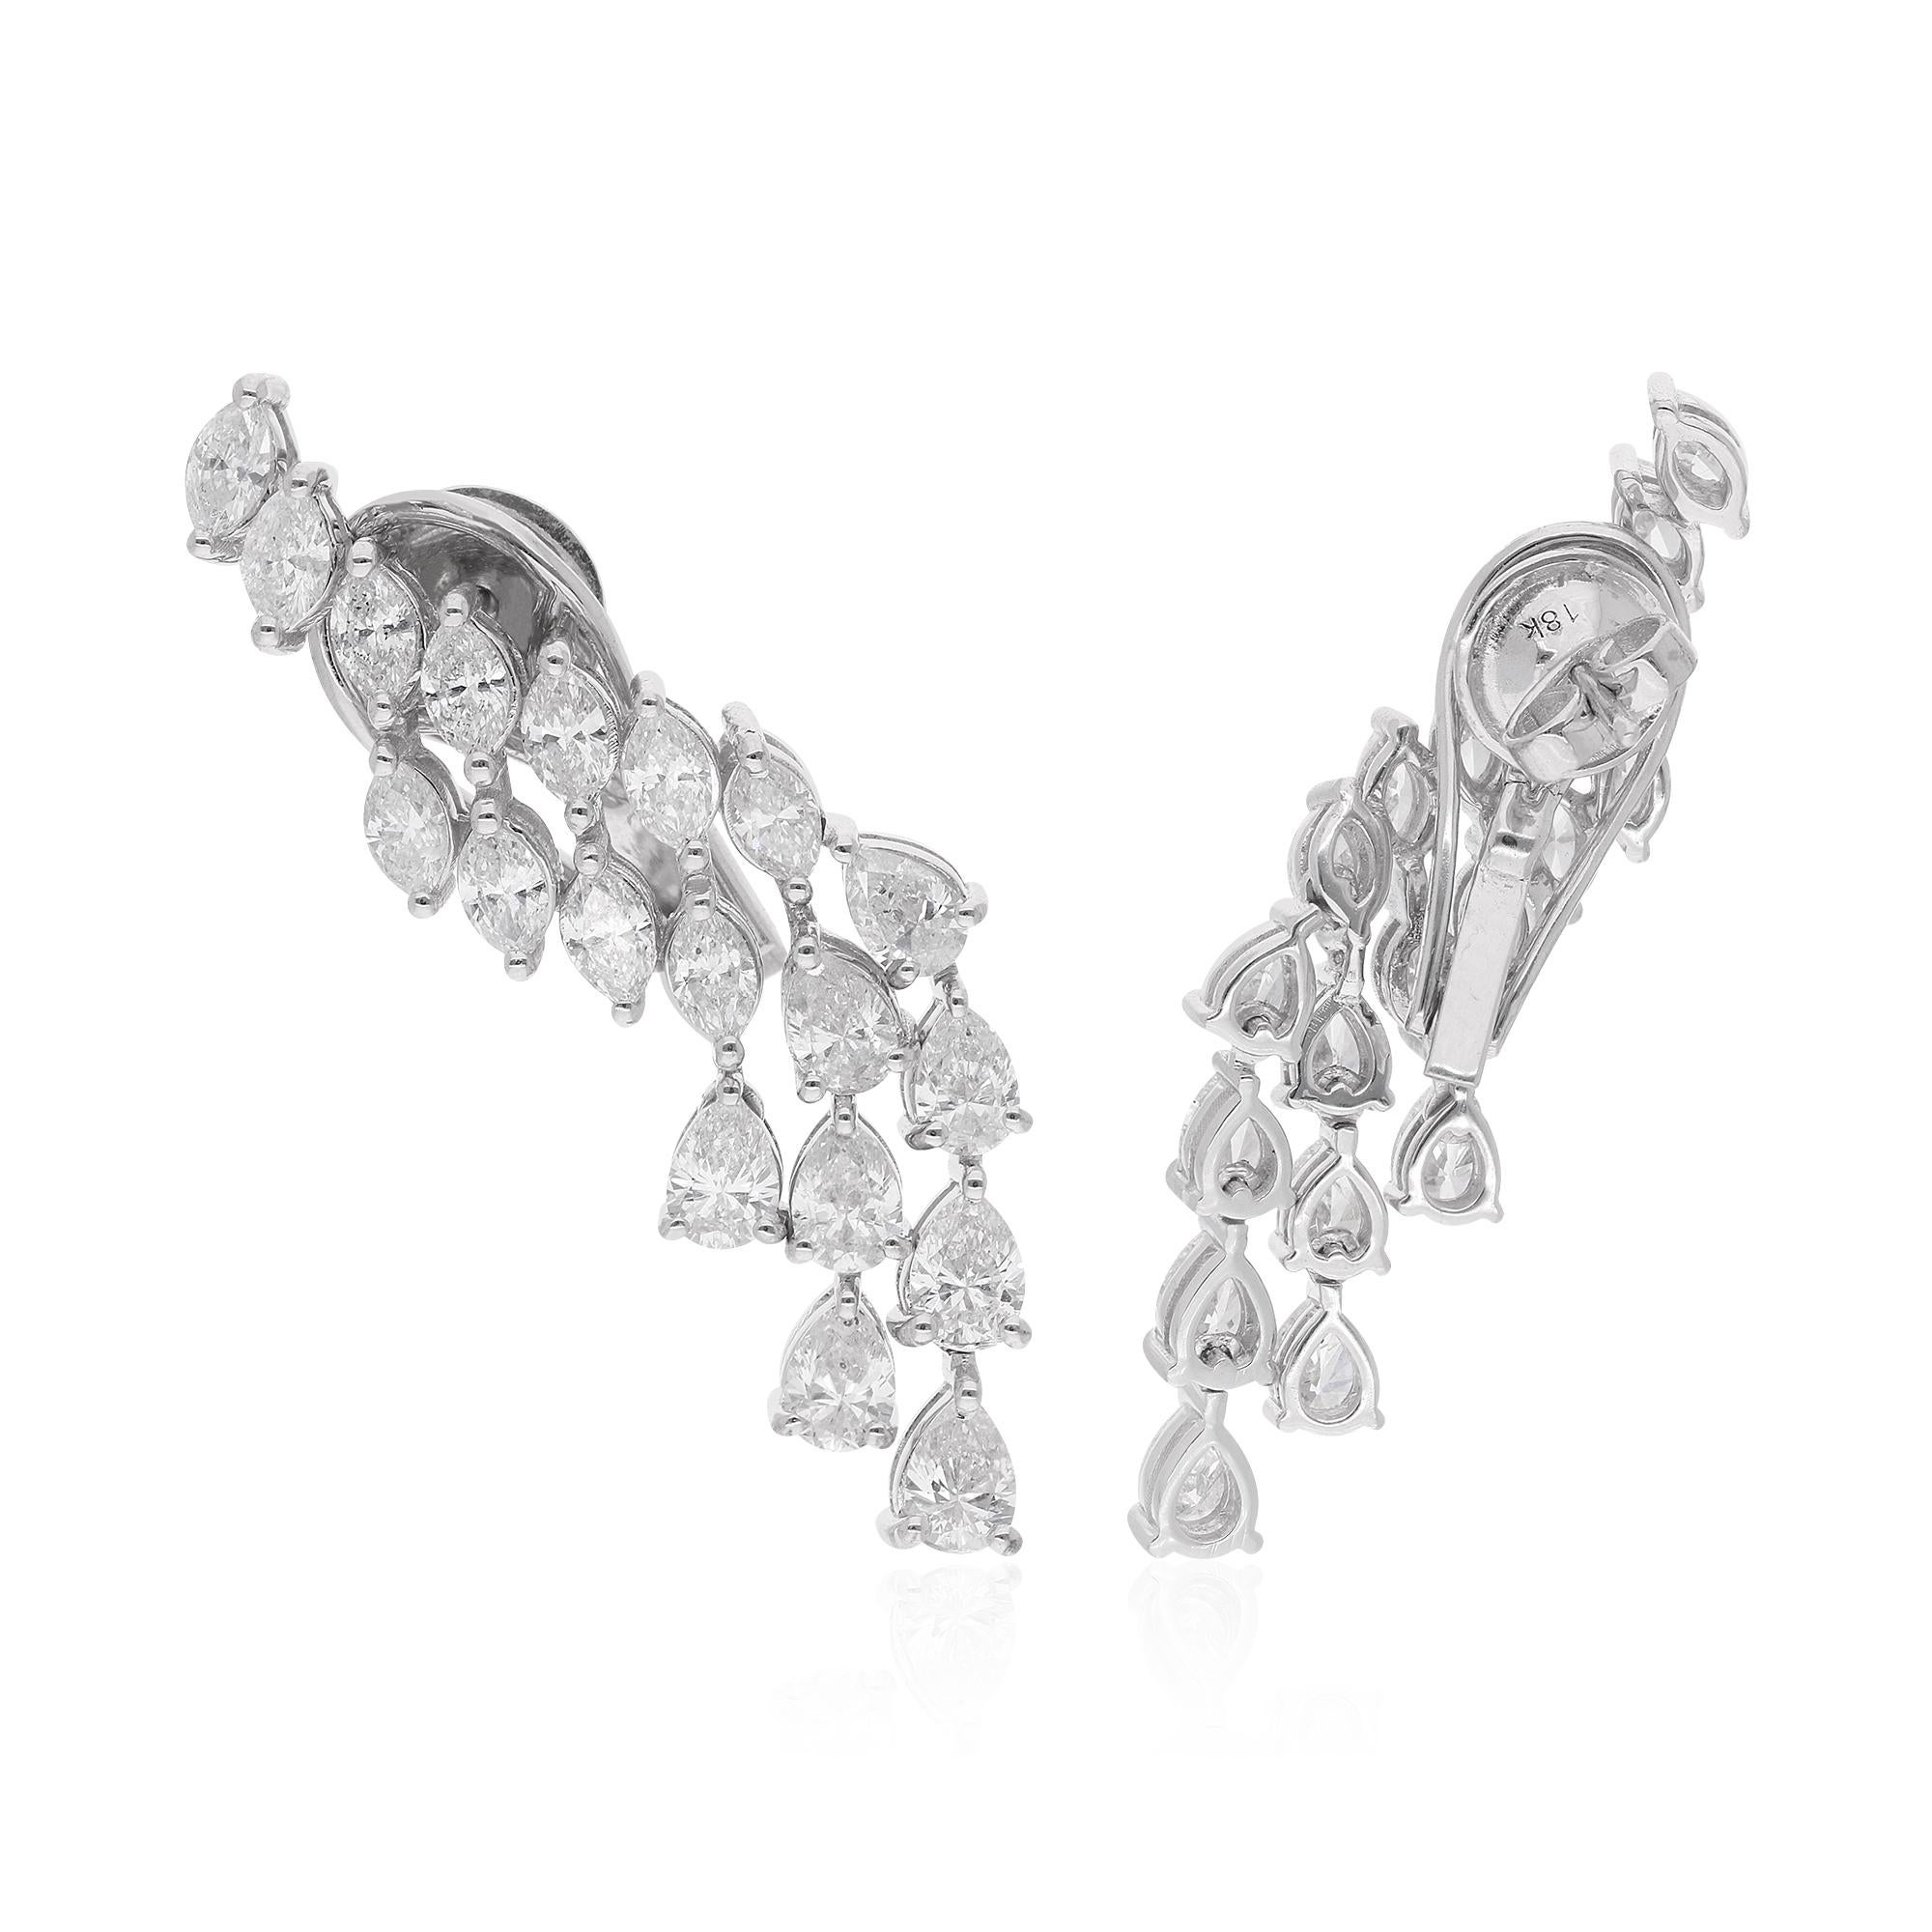 At the center of each earring, resplendent pear-shaped diamonds grace the stage, their unparalleled brilliance stealing the spotlight with every movement. These pear-cut diamonds, renowned for their timeless allure and unparalleled sparkle, exude a